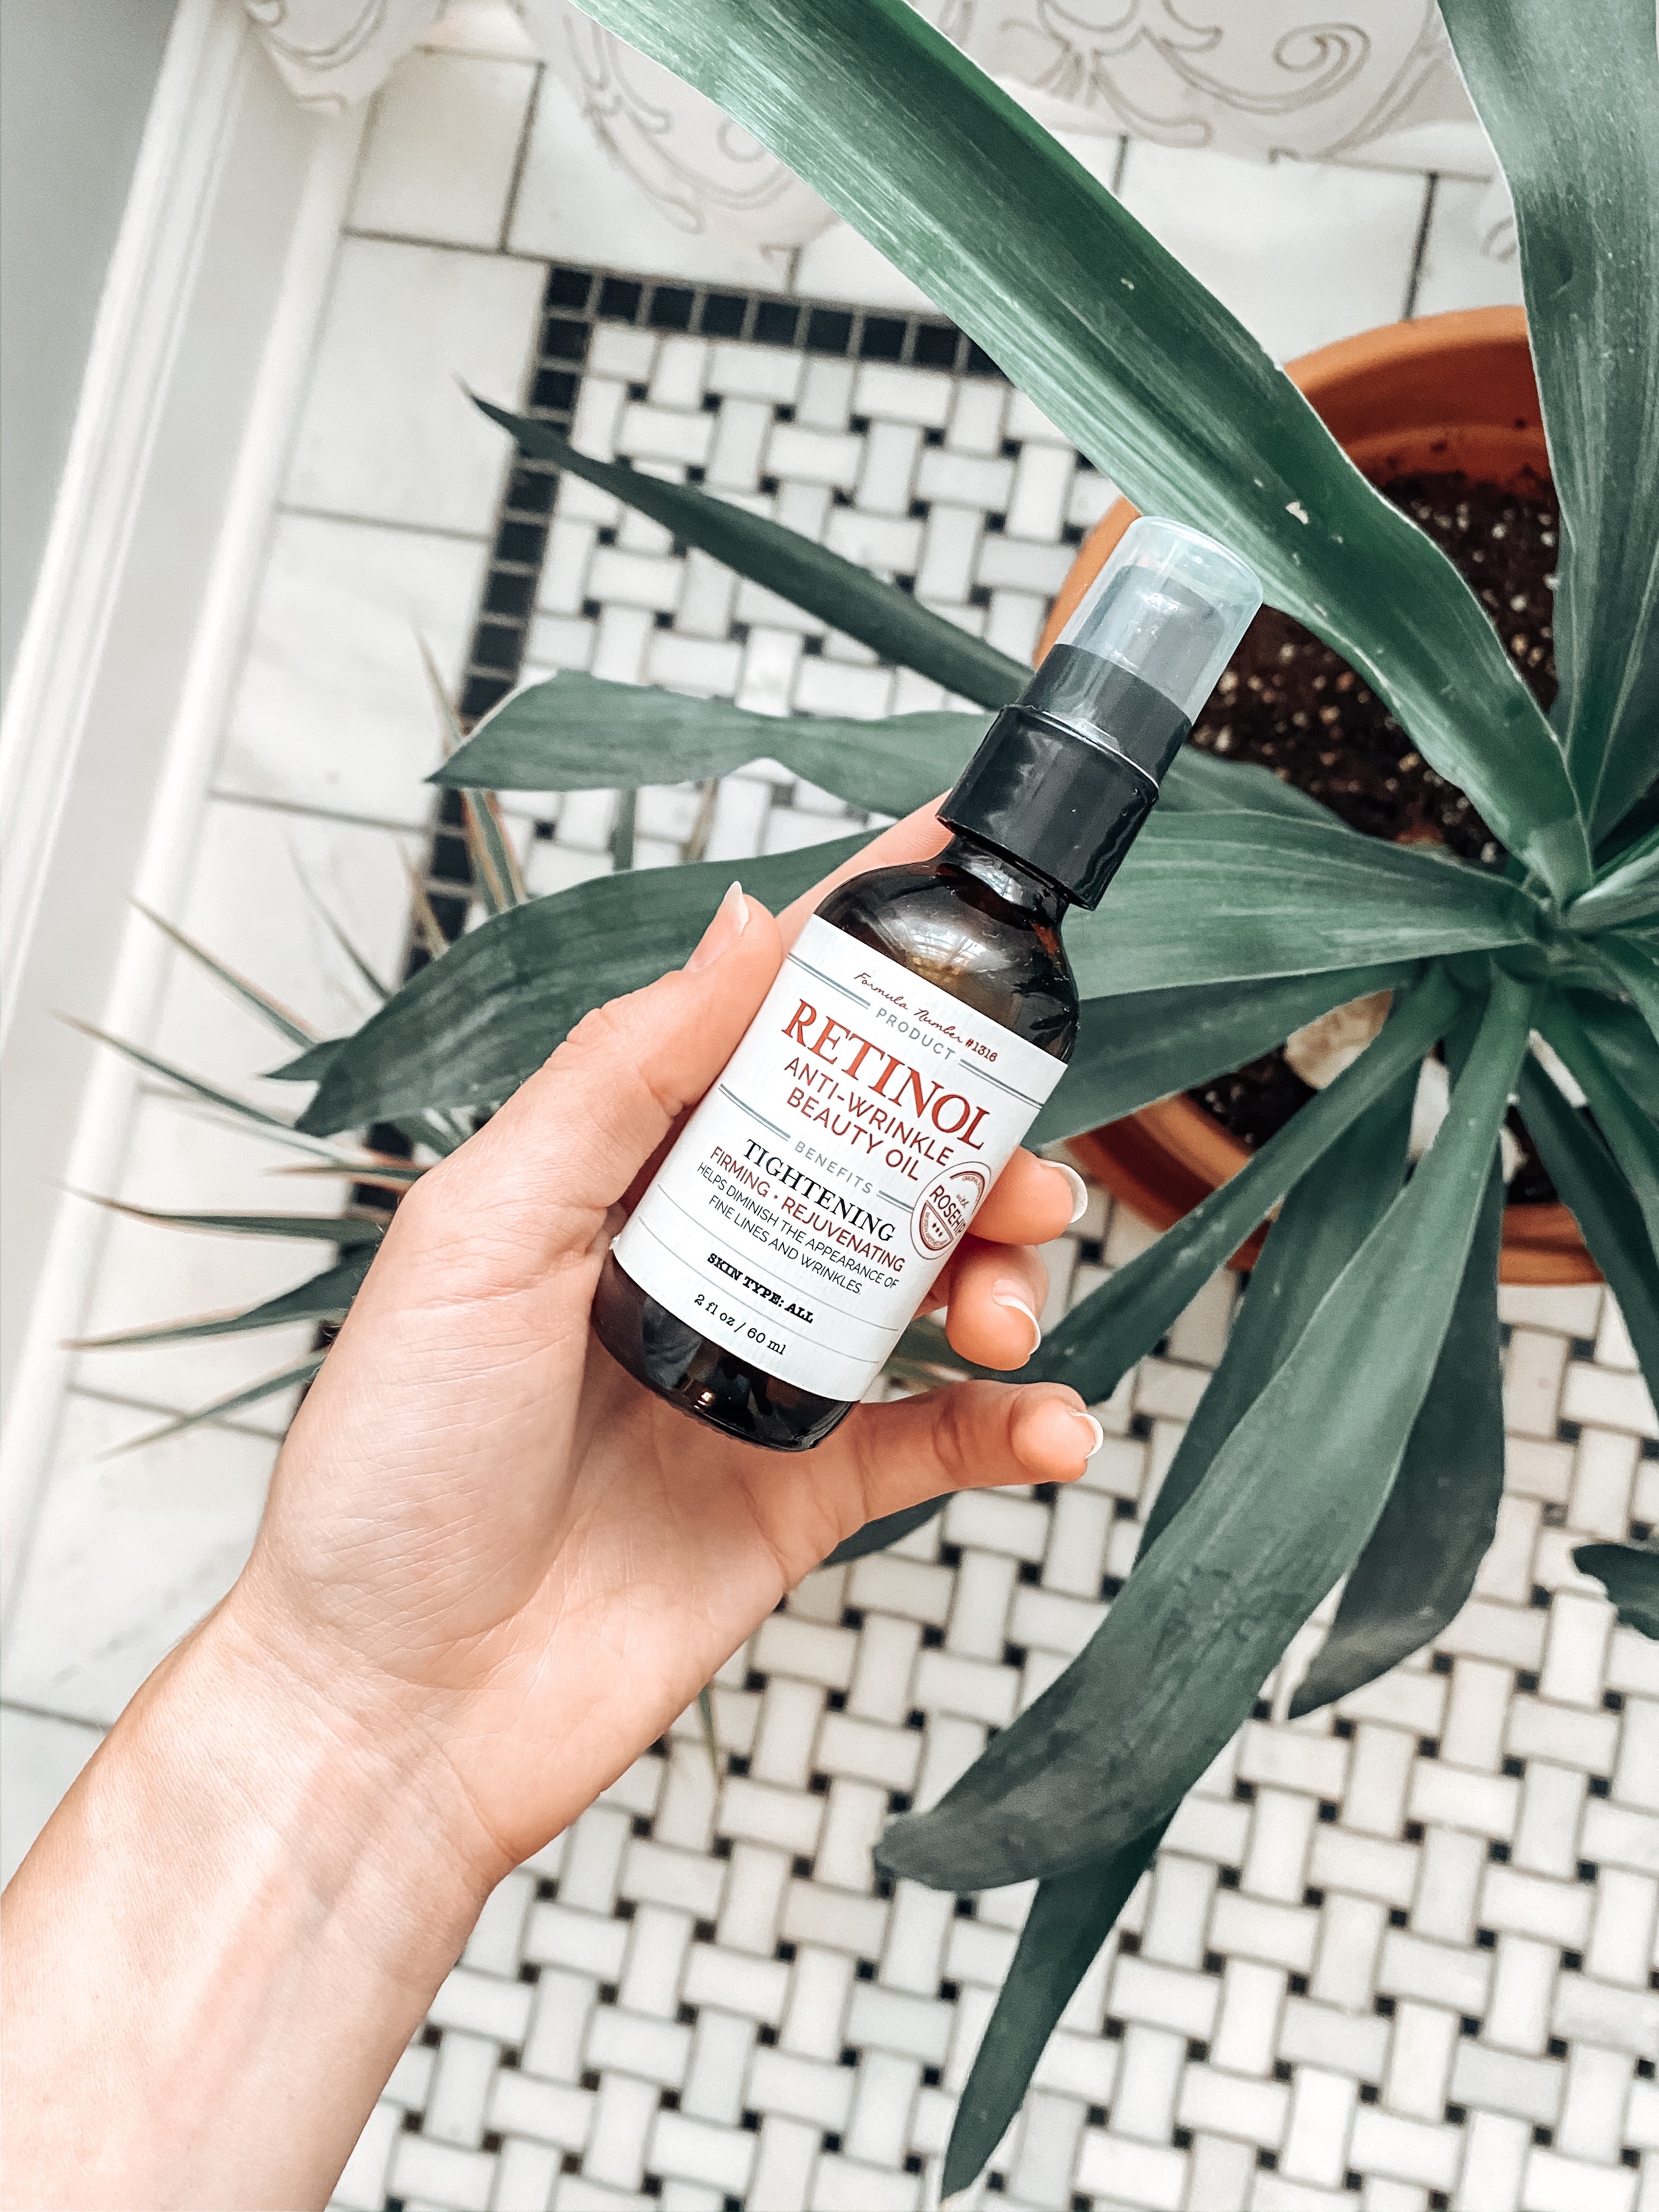 Image of Candace's hand holding a bottle of Retinol Oil over plants and black and white marble tile.